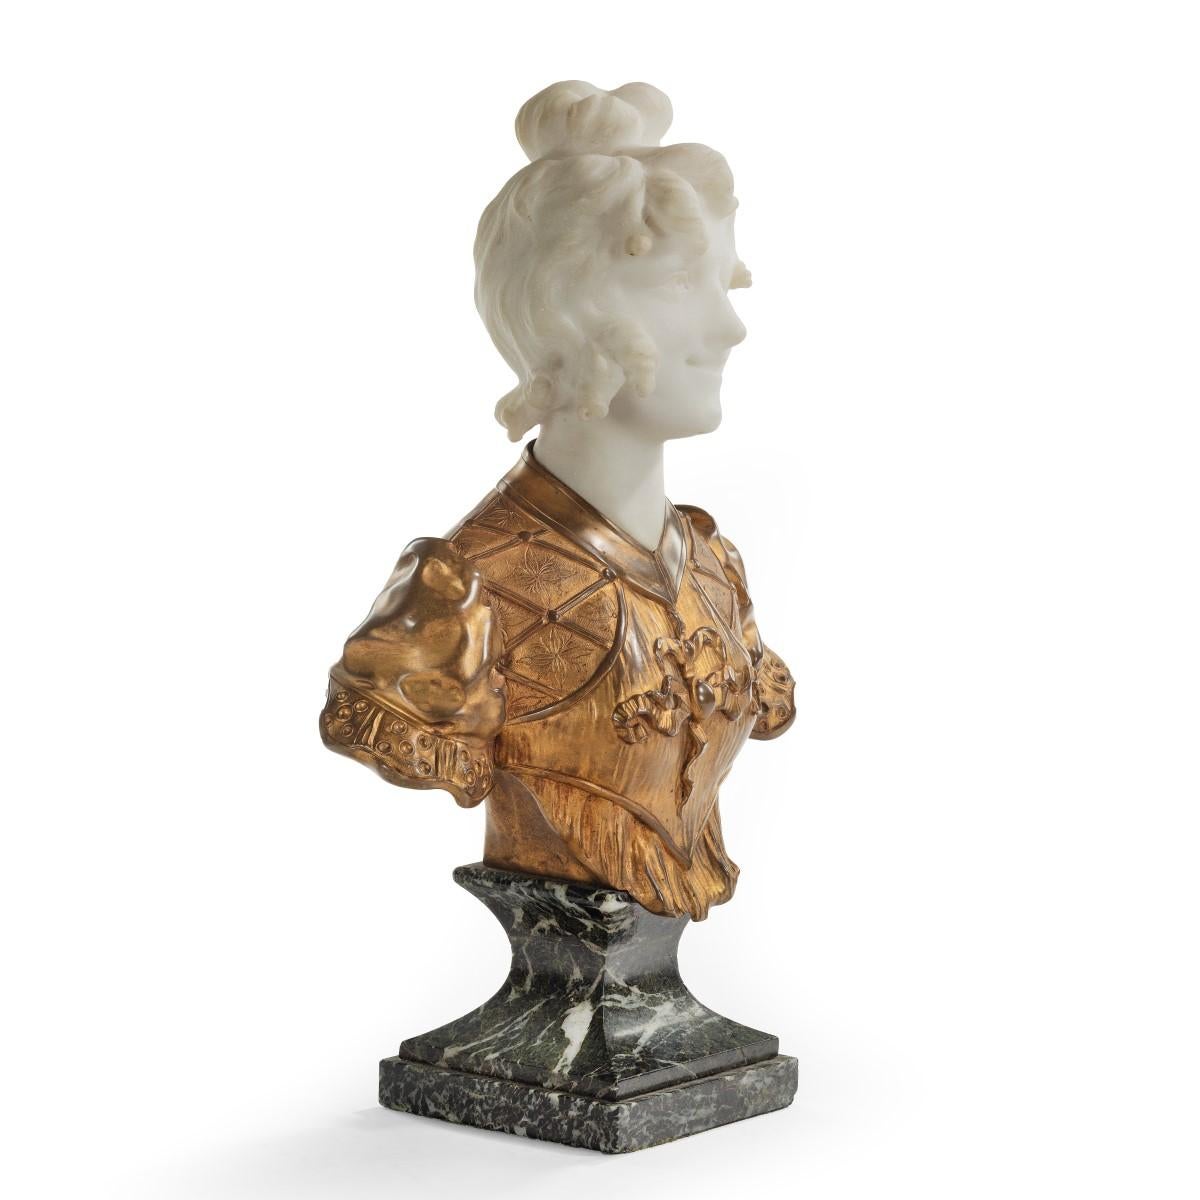 A marble and Ormolu bust by Marionnet, showing the white marble head and shoulders of a girl with her hair in a bun and ringlets framing her face, with a ruffled bodice with short sleeves and ribbons rendered in ormolu, all on a spinach marble